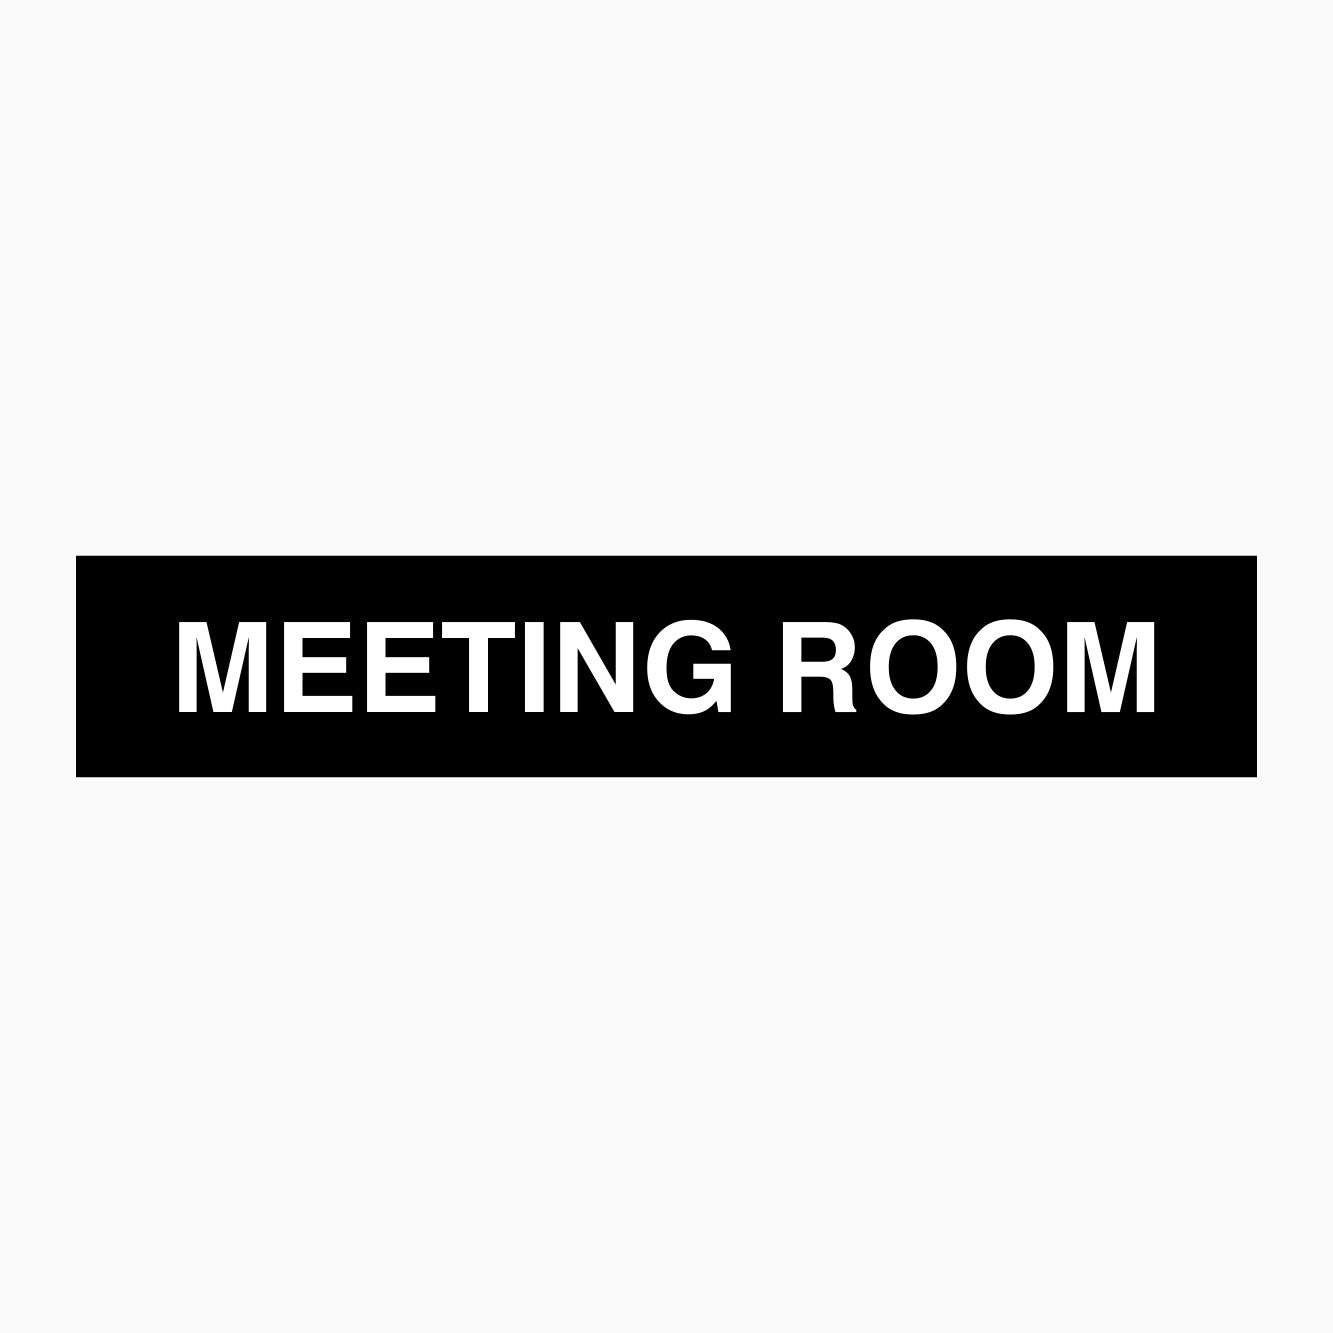 MEETING ROOM SIGN - GET SIGNS